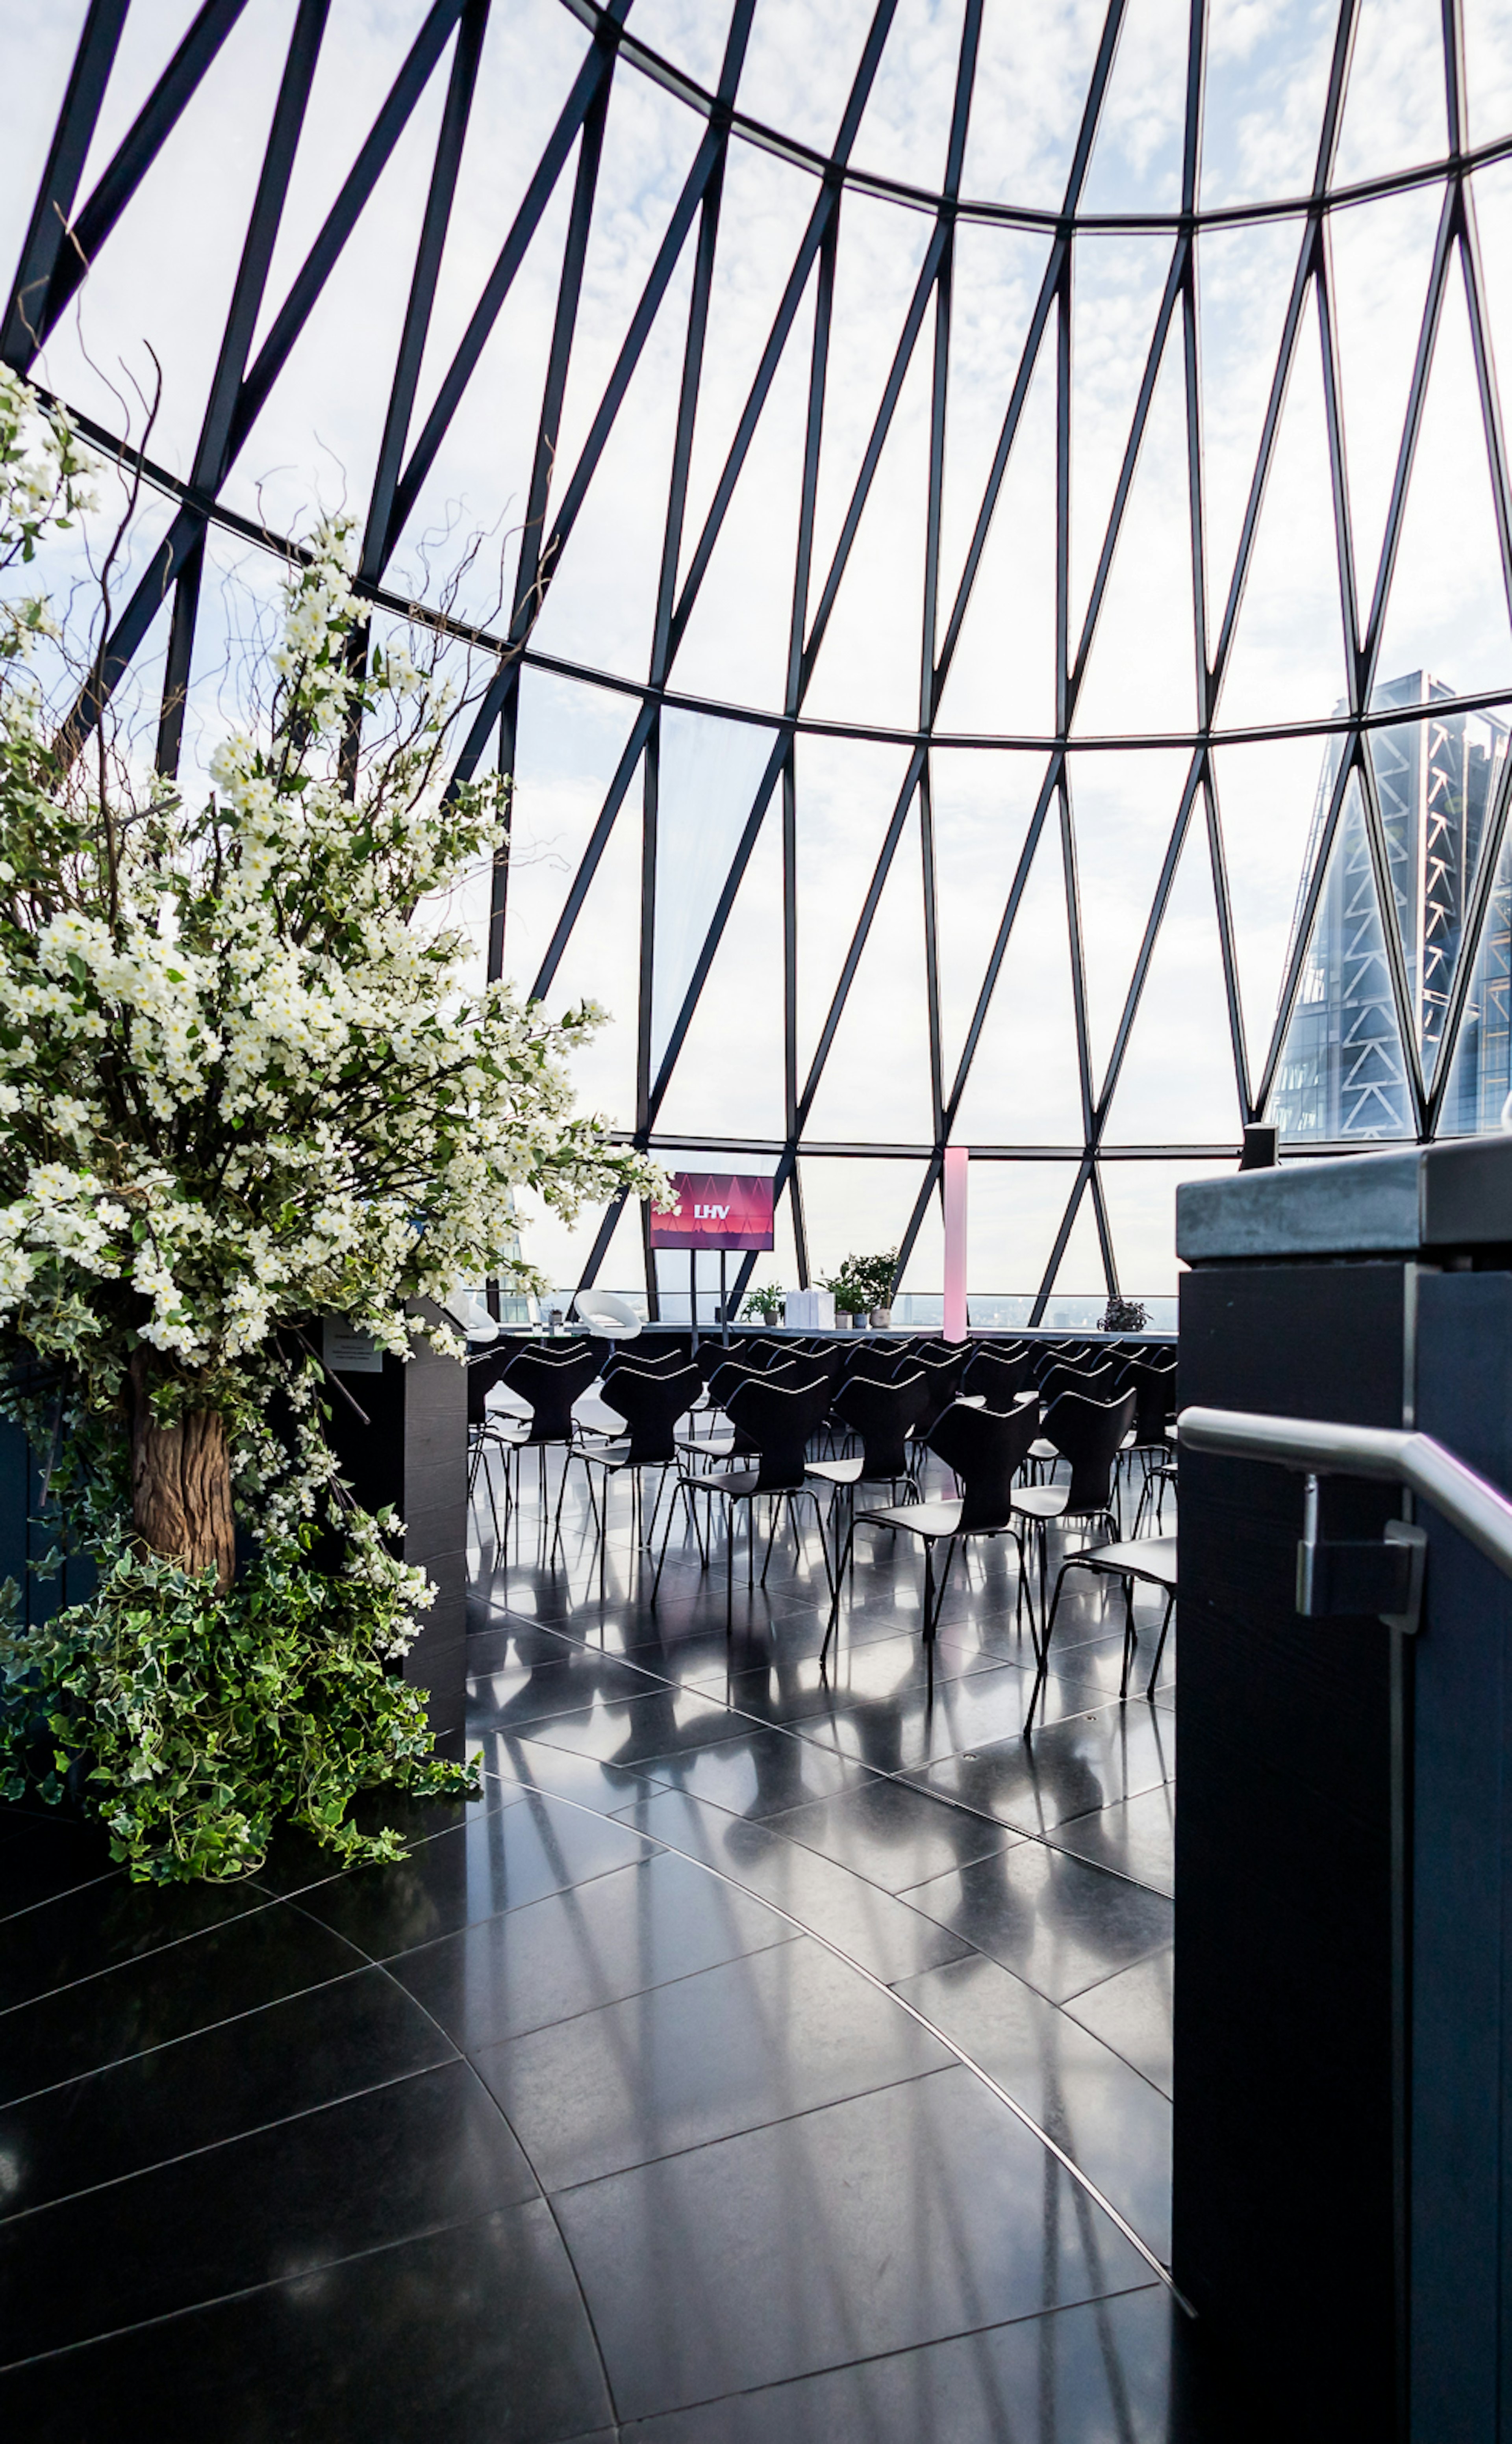 Engagement Party Venues - Searcys at the Gherkin